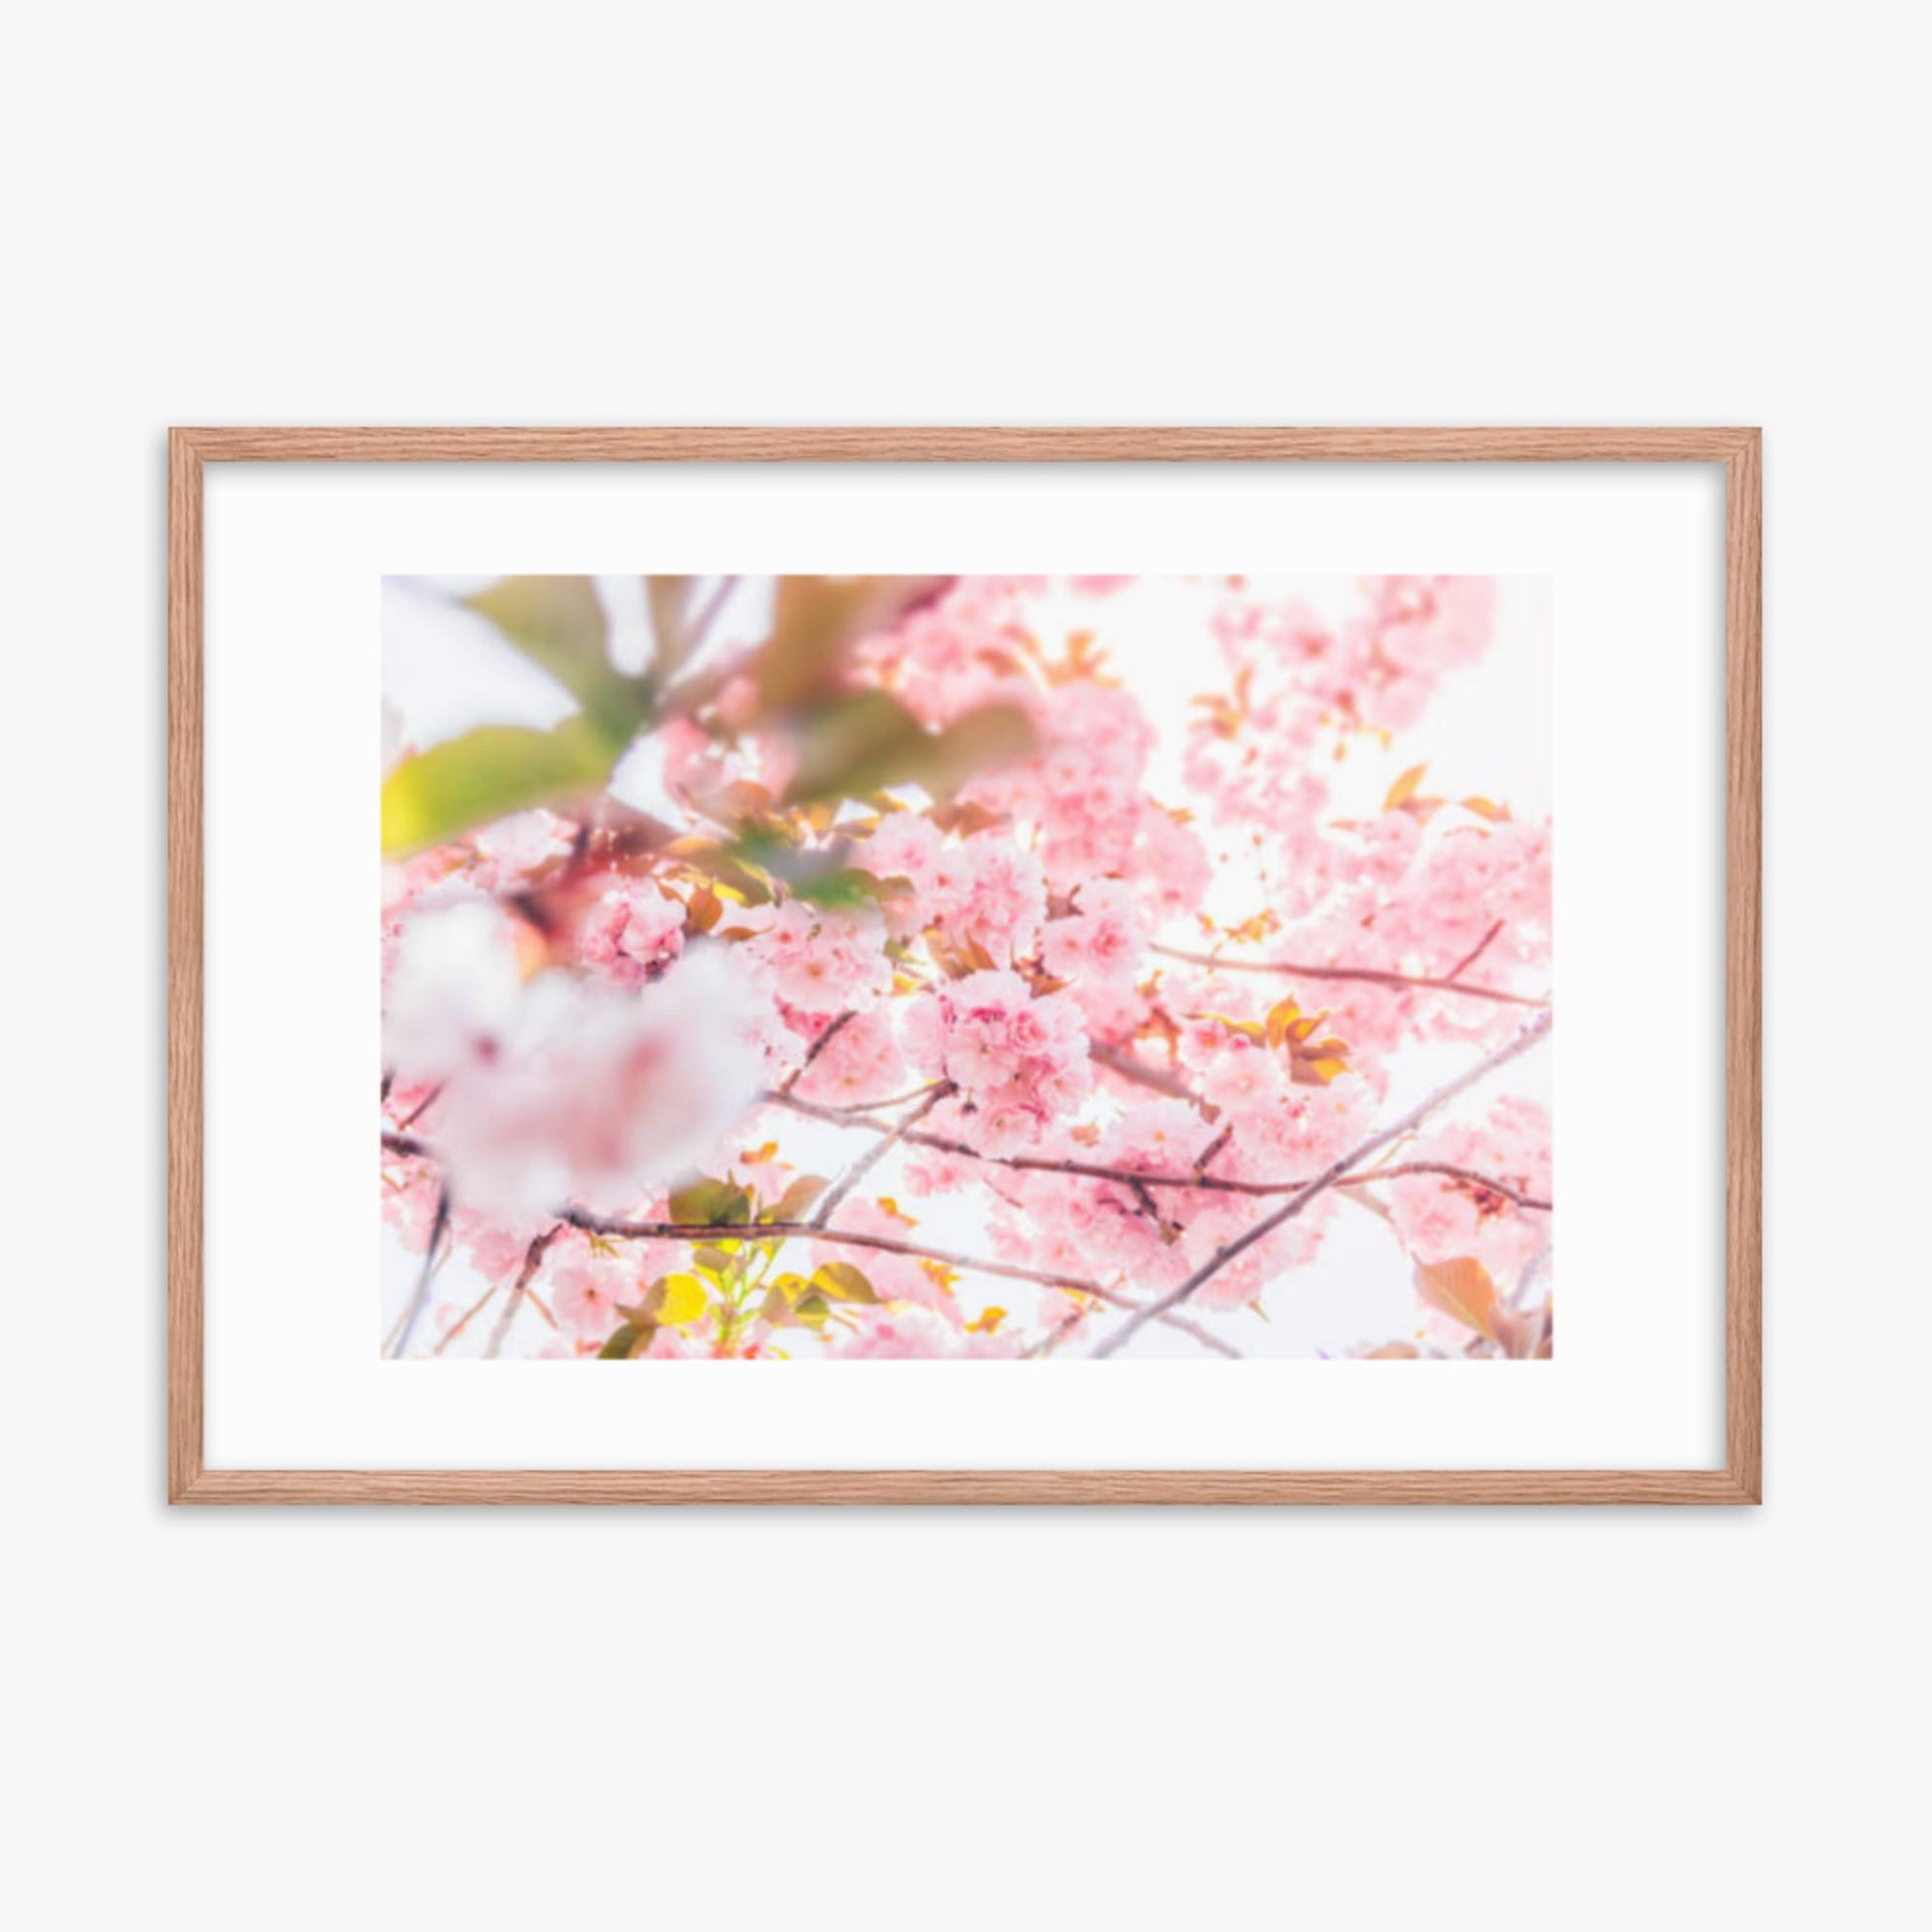 Cherry blossom flowers and sunshine 24x36 in Poster With Oak Frame